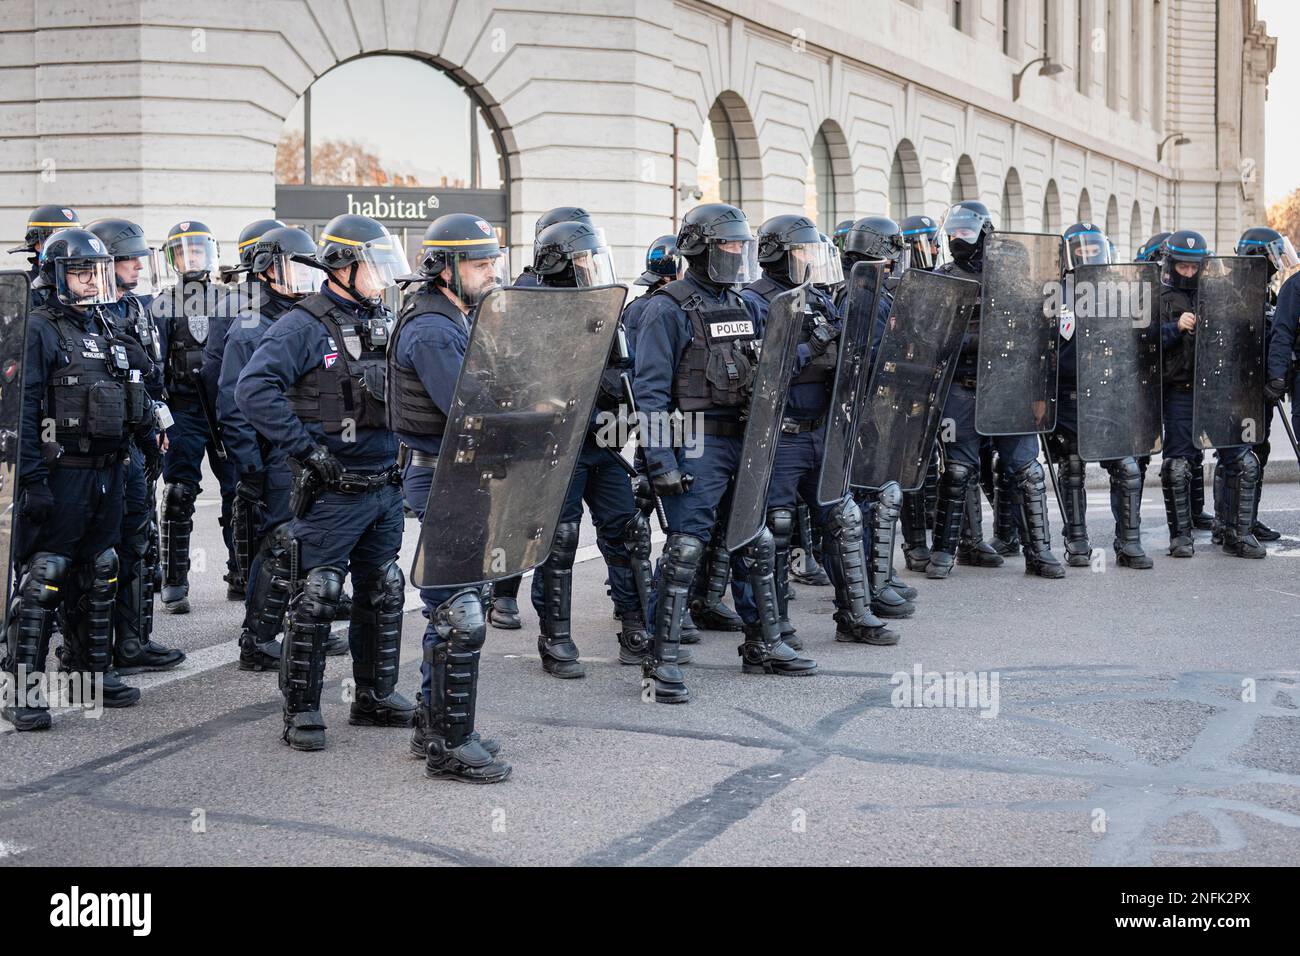 France, Lyon, 2023-02-16. Demonstration against the pension reform. CRS in line with shields waiting for the demonstrators. Photograph by Franck CHAPO Stock Photo